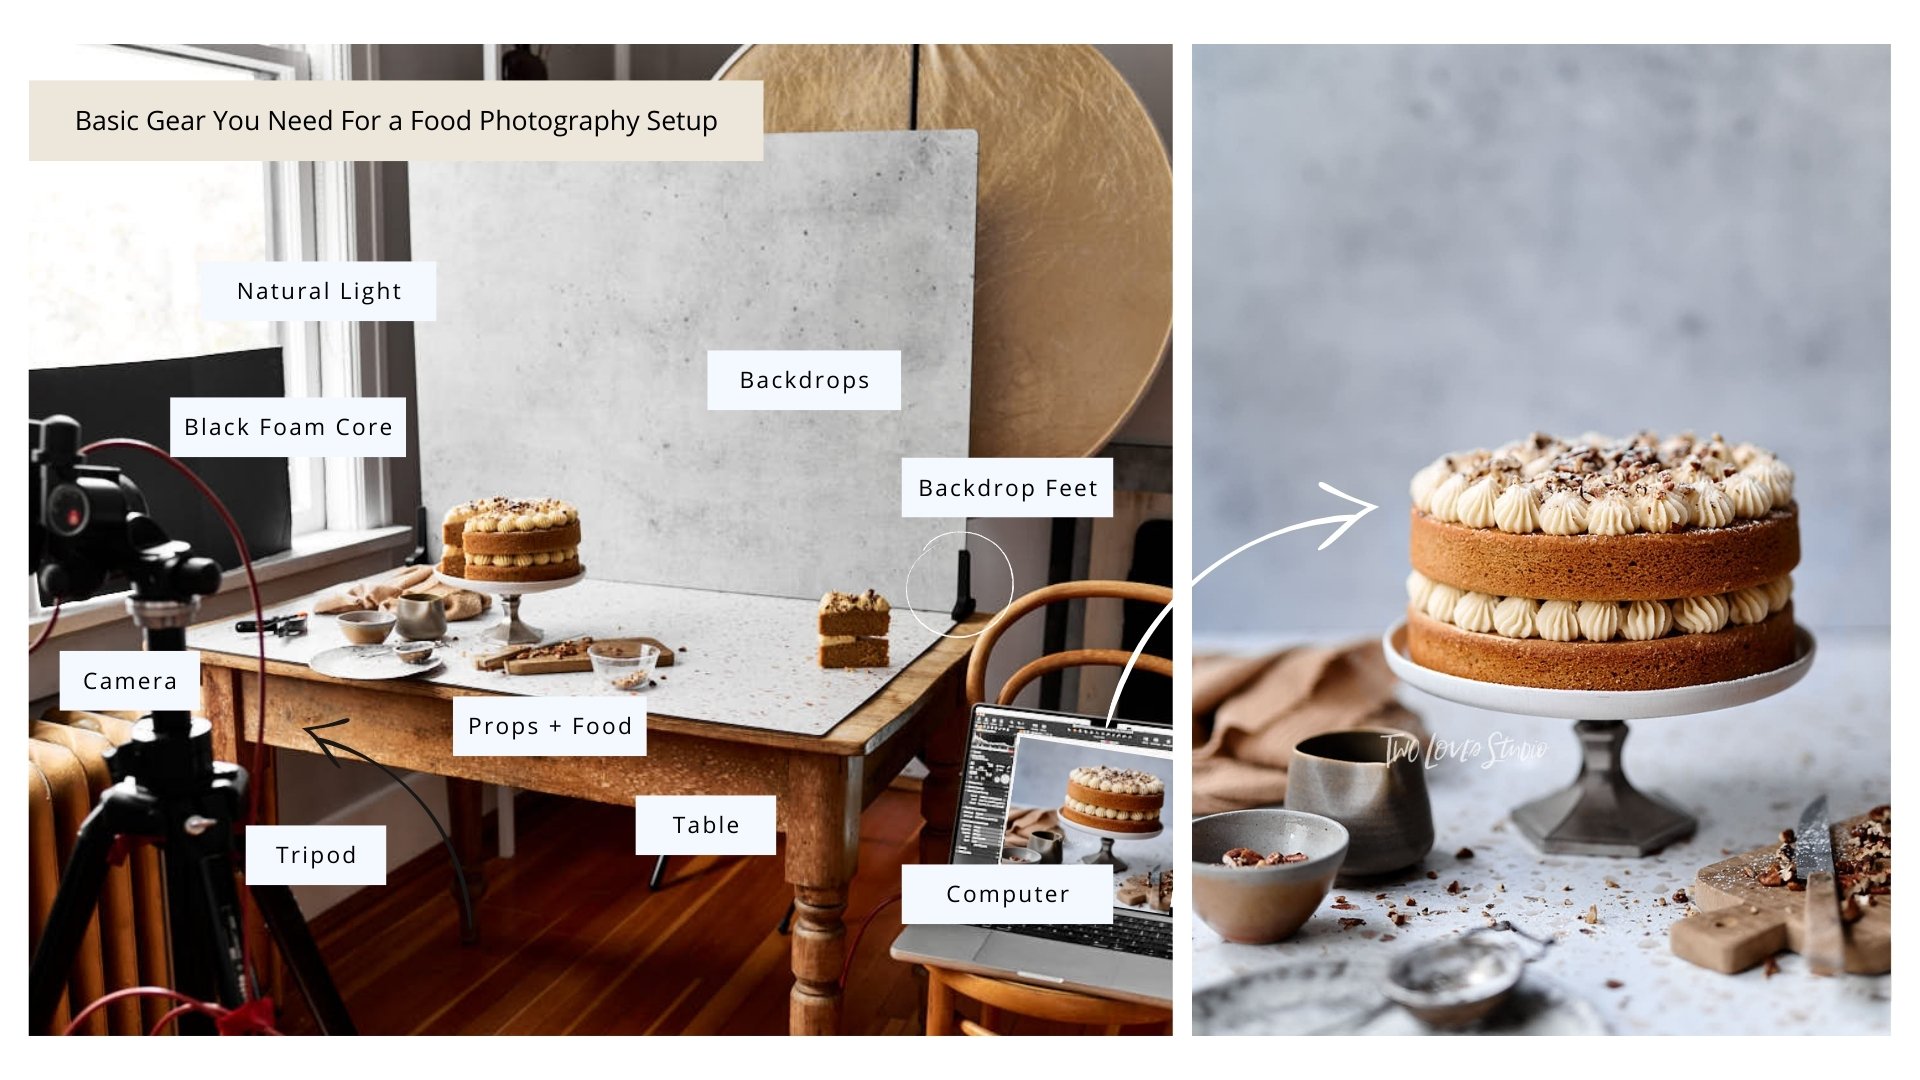 behind the scenes of a food photography setup with the final shots of a walnut layer cake on a cake stand.